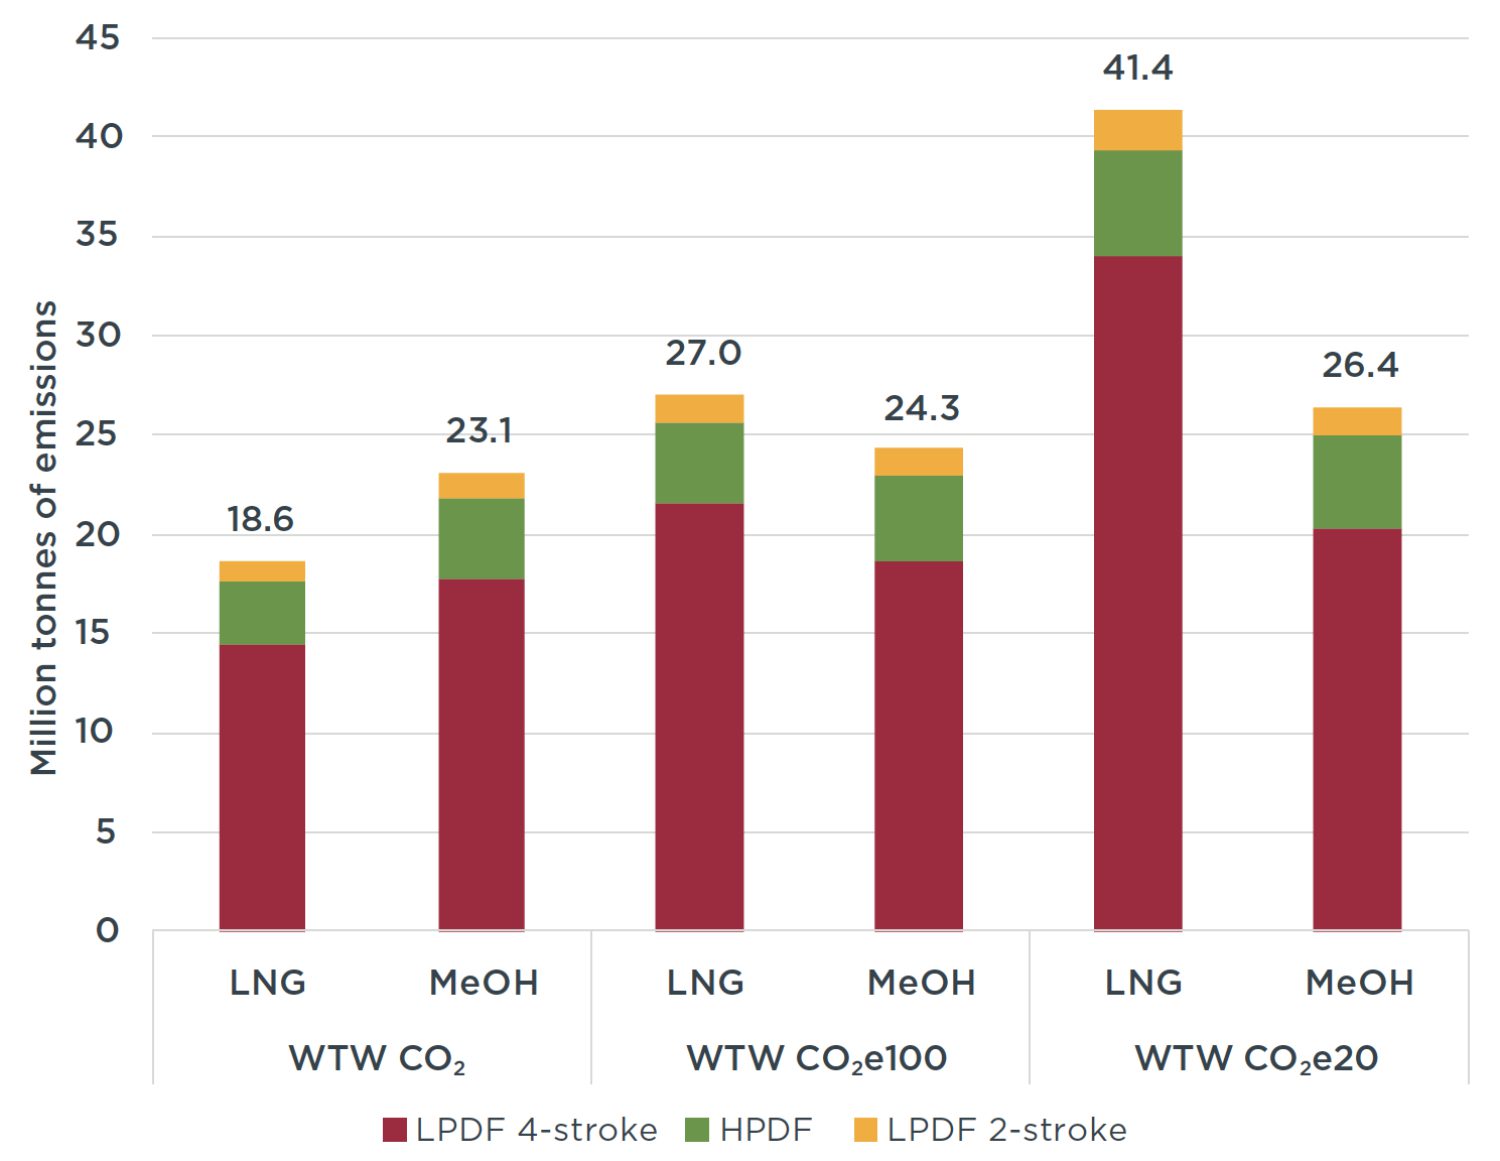 bar chart with red for emissions from LPDF 4-stroke engines, green for those from HPDF, and yellow for LPDF 2-stroke; CO2 only is on the left, CO2e100 in the middle, and CO2e20 is on the right